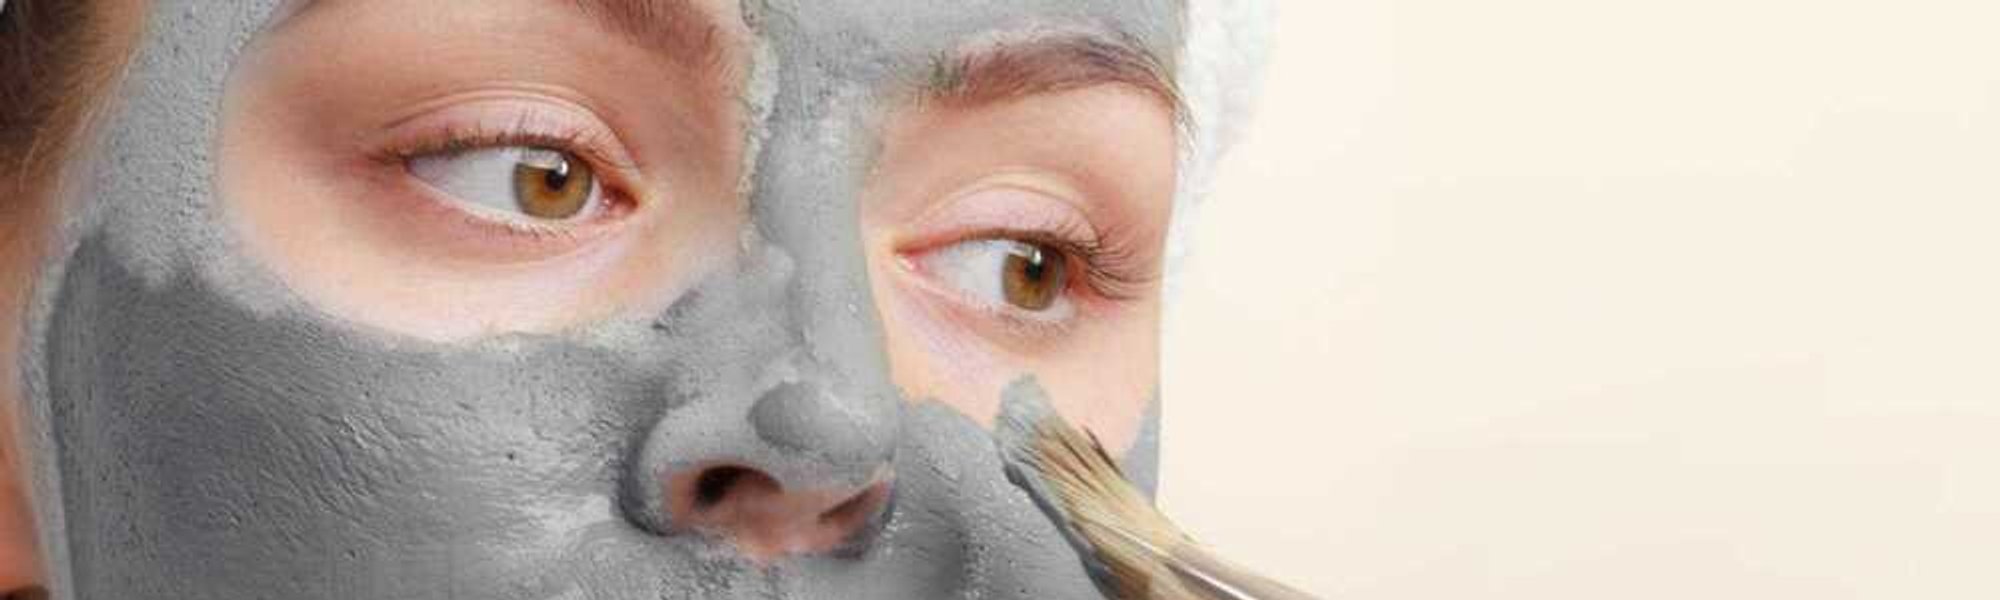 3 Homemade Face Masks To Purify Your Skin